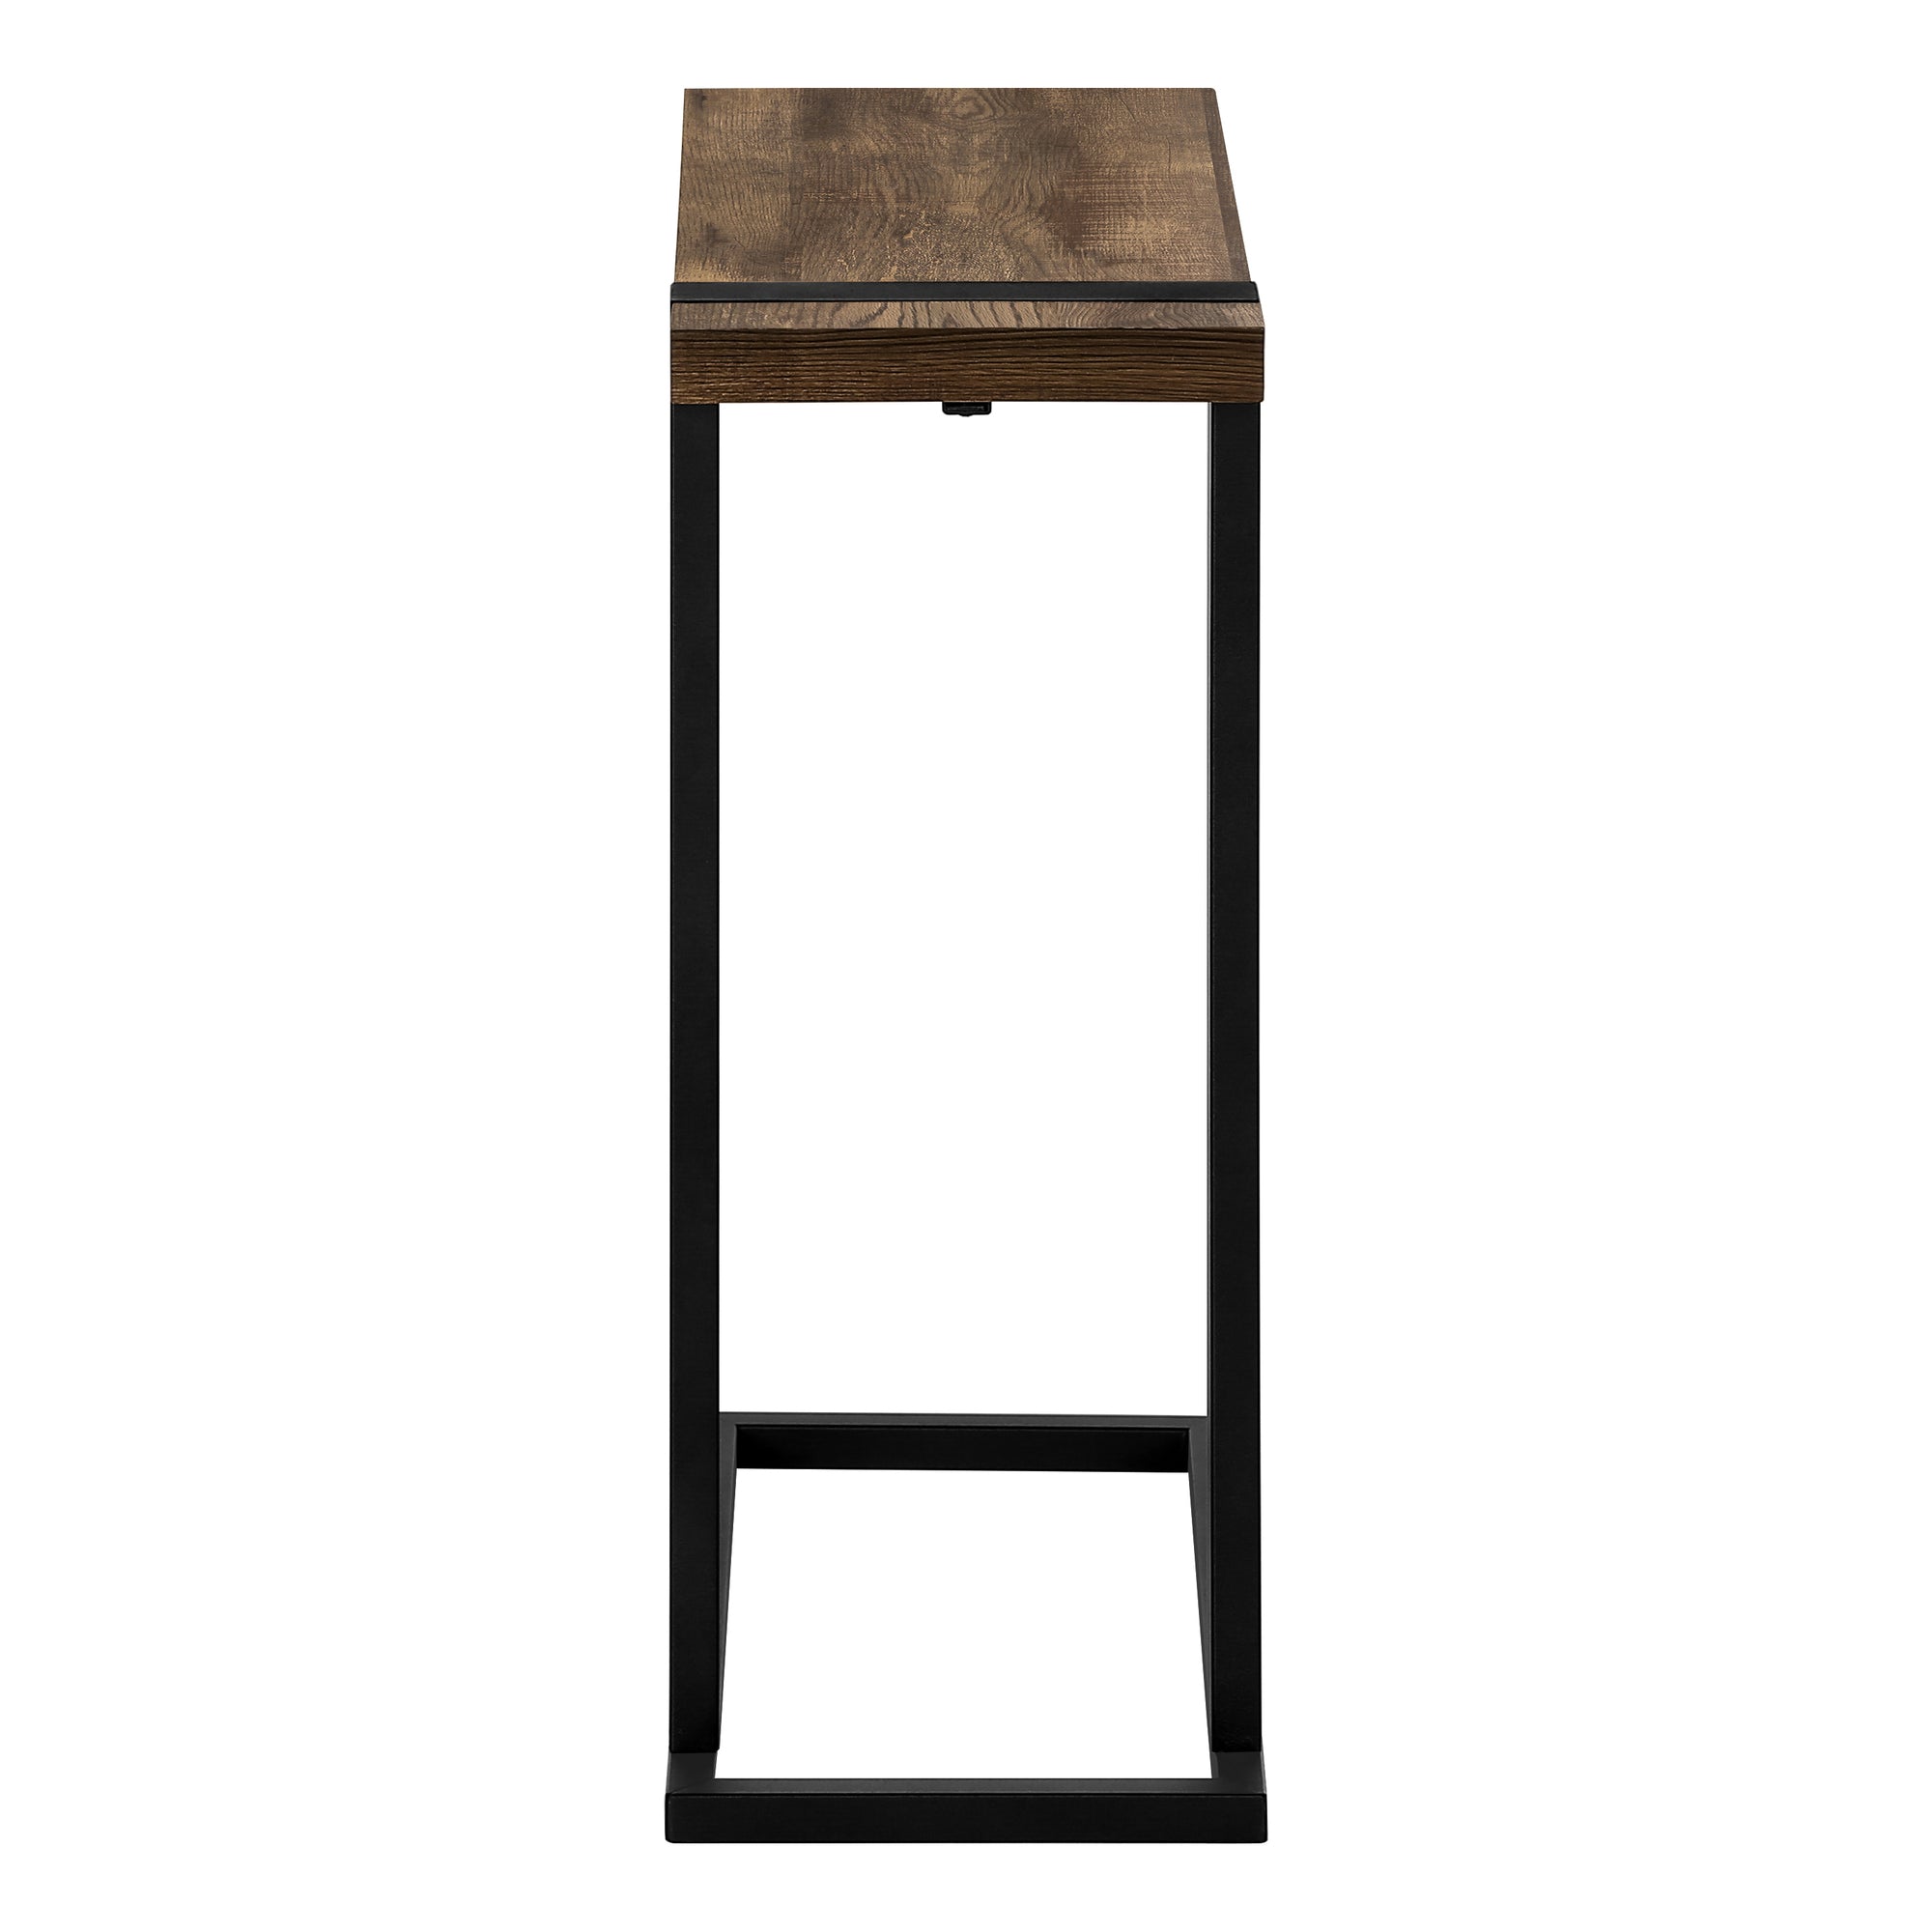 I 2853 - ACCENT TABLE - BROWN RECLAIMED WOOD-LOOK / BLACK METAL BY MONARCH SPECIALTIES INC